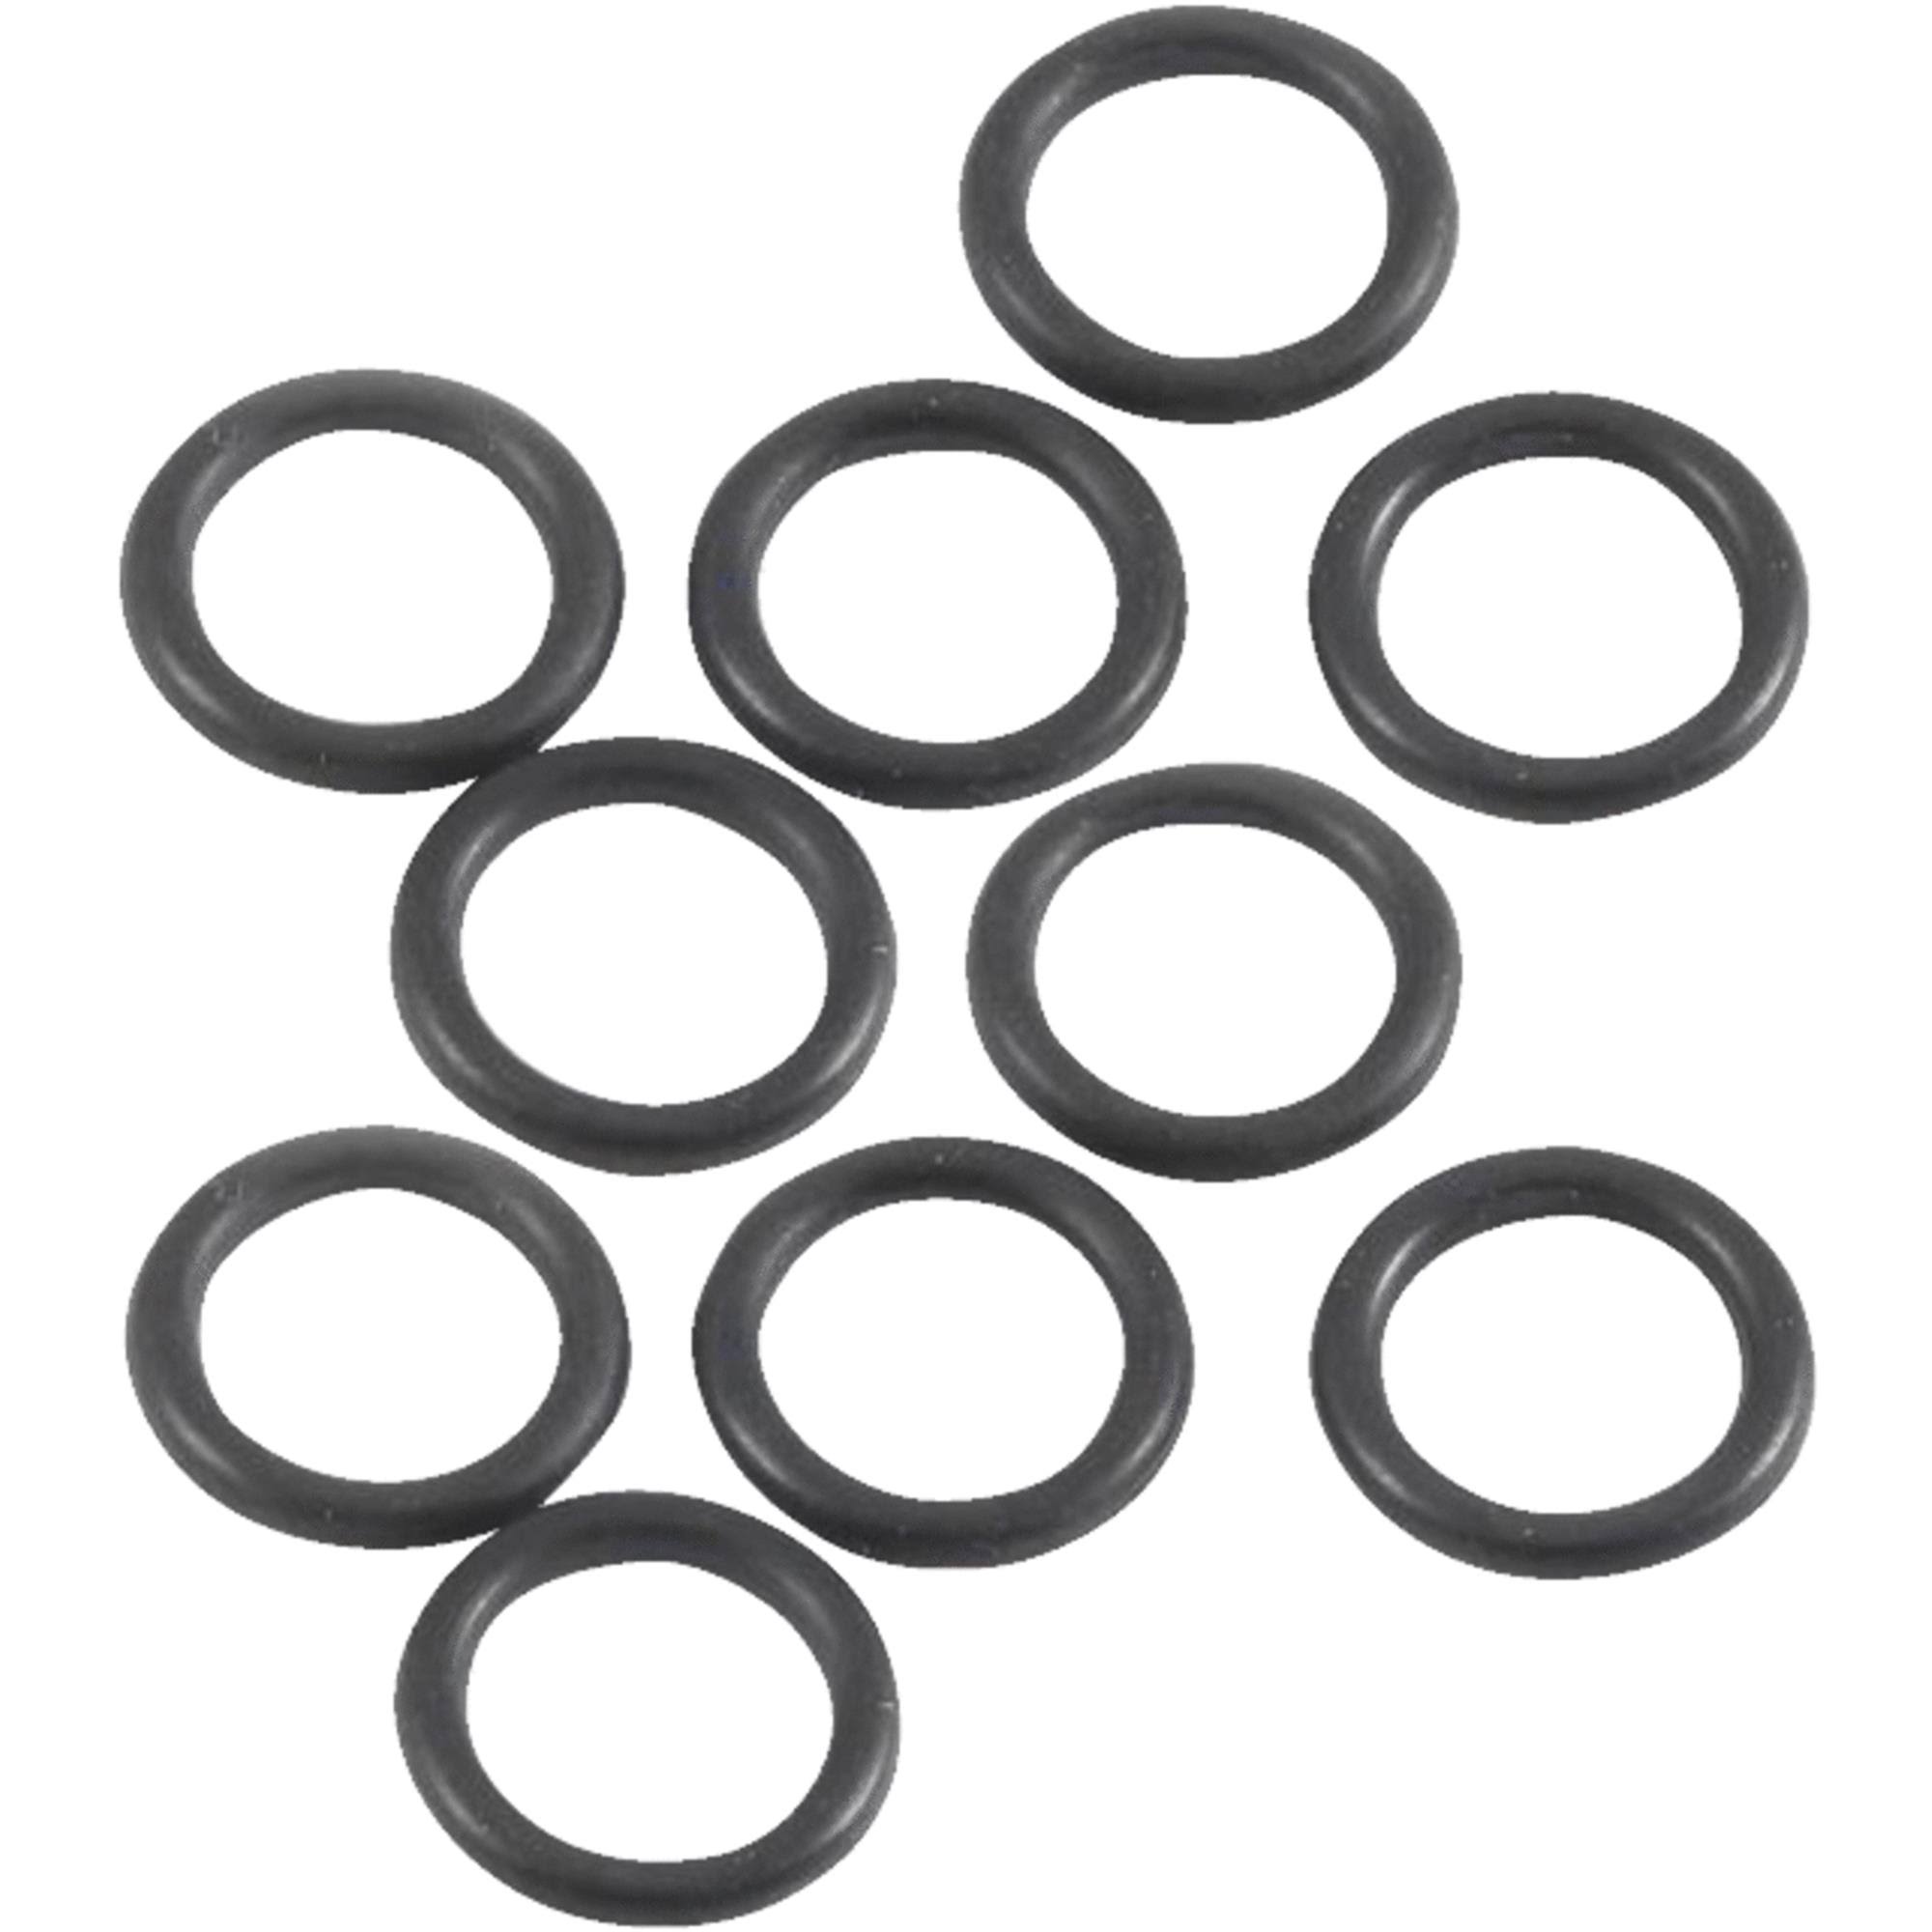 Forney 75191 Pressure Washer O-Ring - 1/4", 10pk